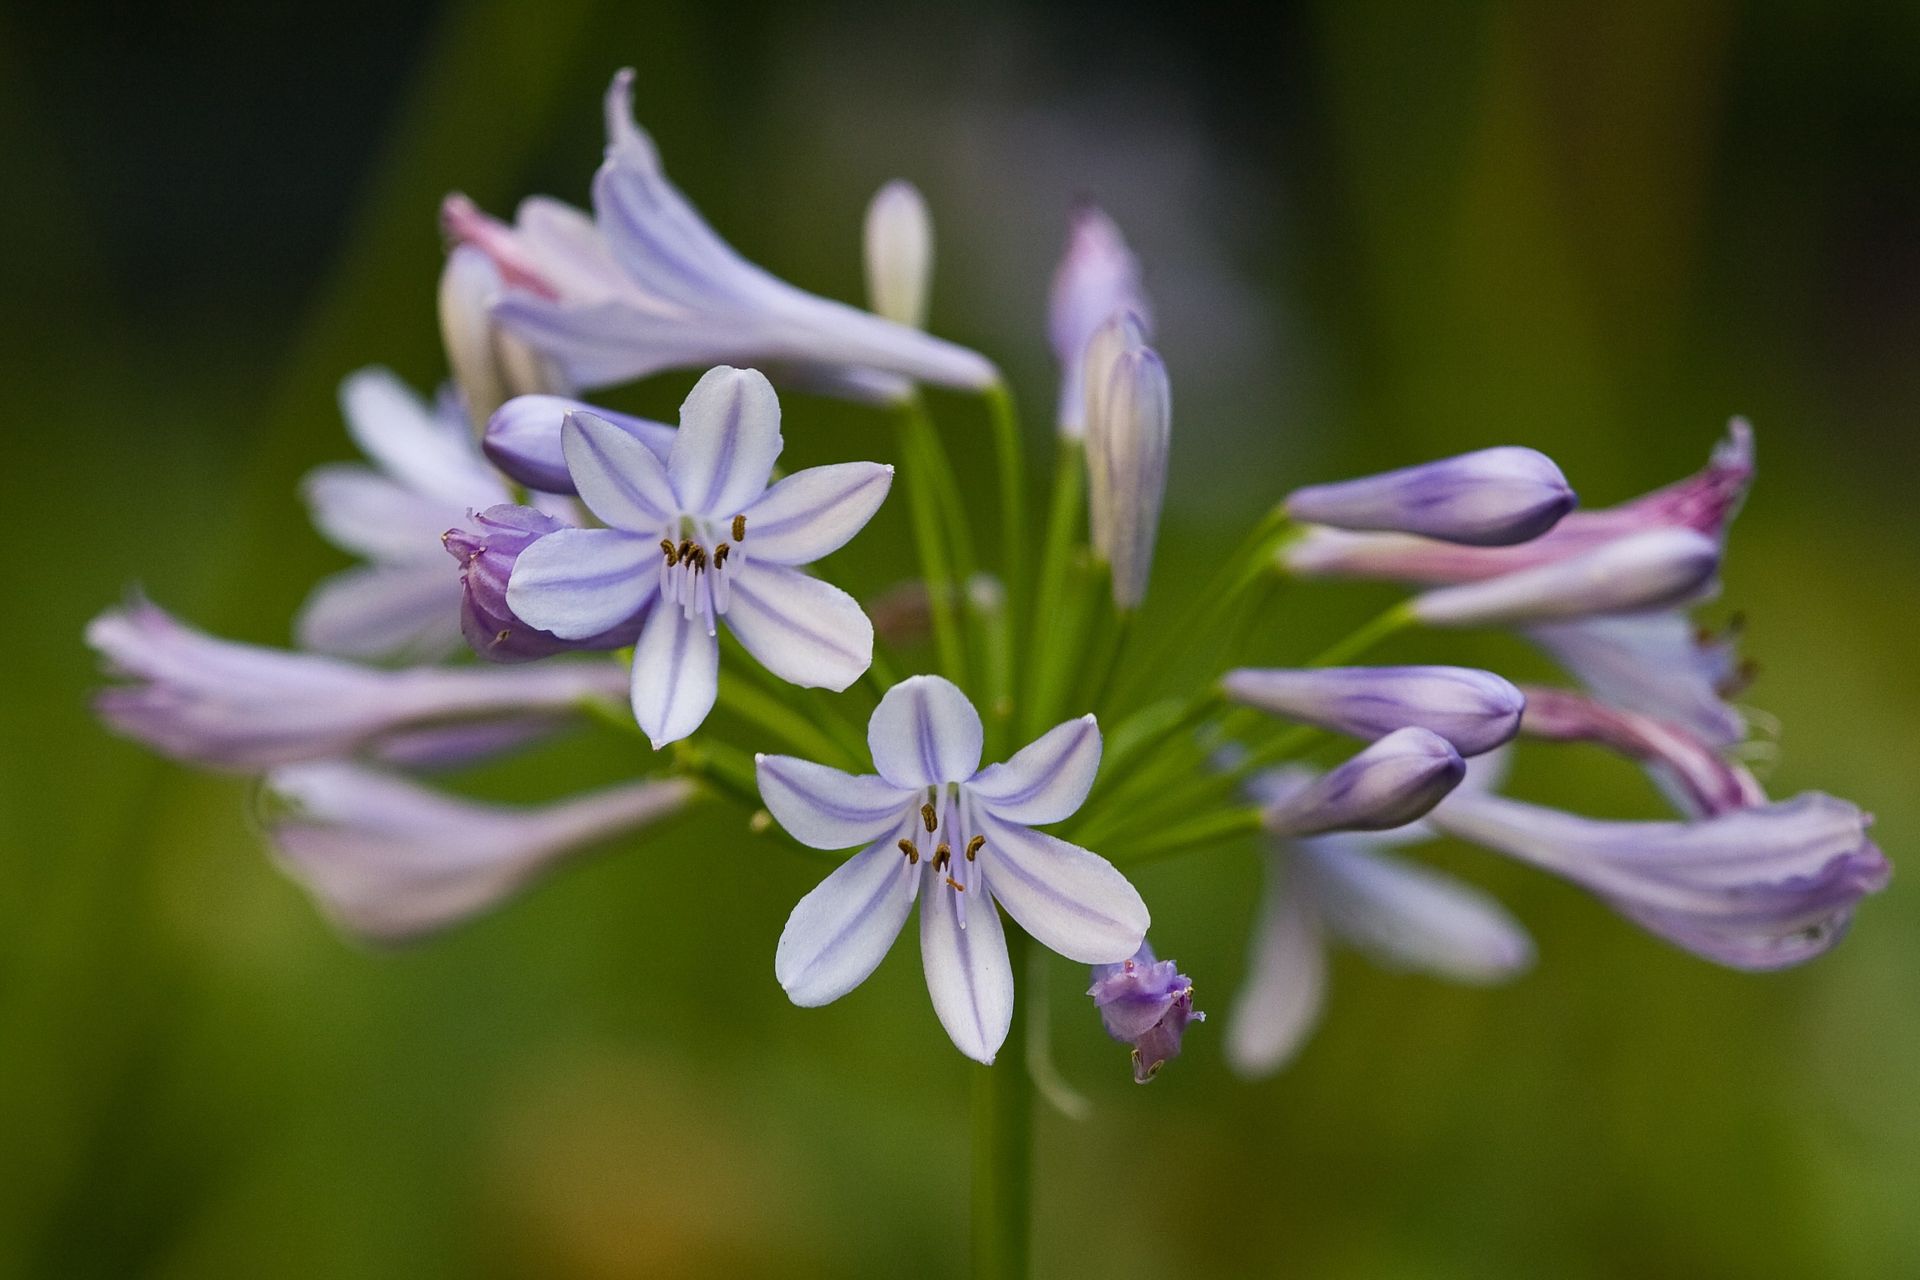 An agapanthus, also known as lily of the Nile.